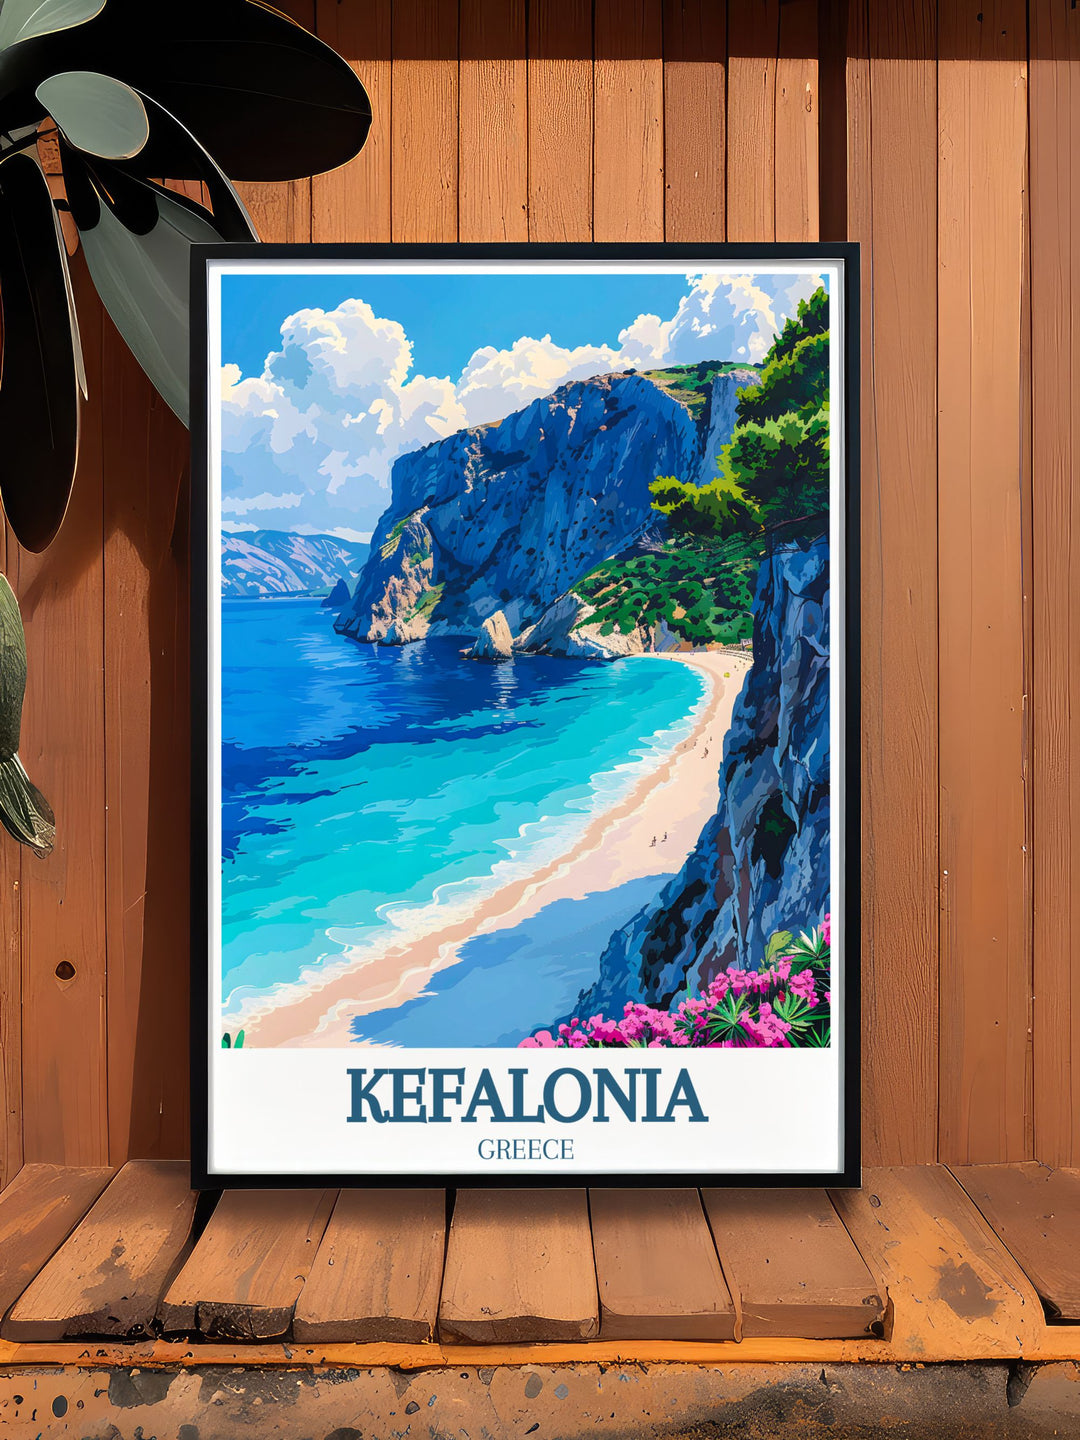 Travel poster of Agia Dynati, showcasing the mountains breathtaking views and lush forests. The detailed artwork captures the essence of this popular hiking destination in Kefalonia.